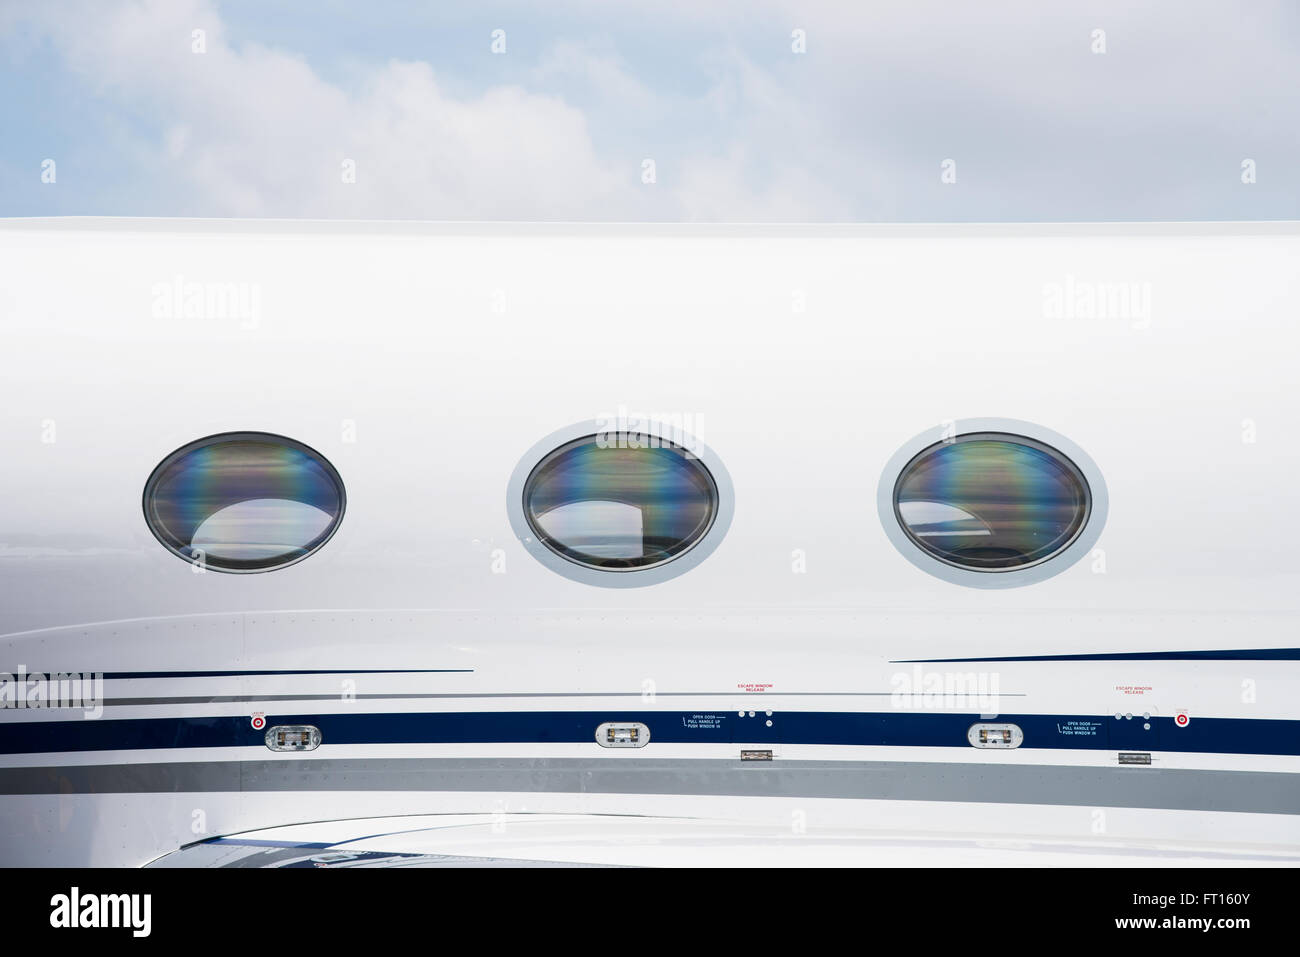 Windows and fuselage detail of white business jet aircraft. Stock Photo